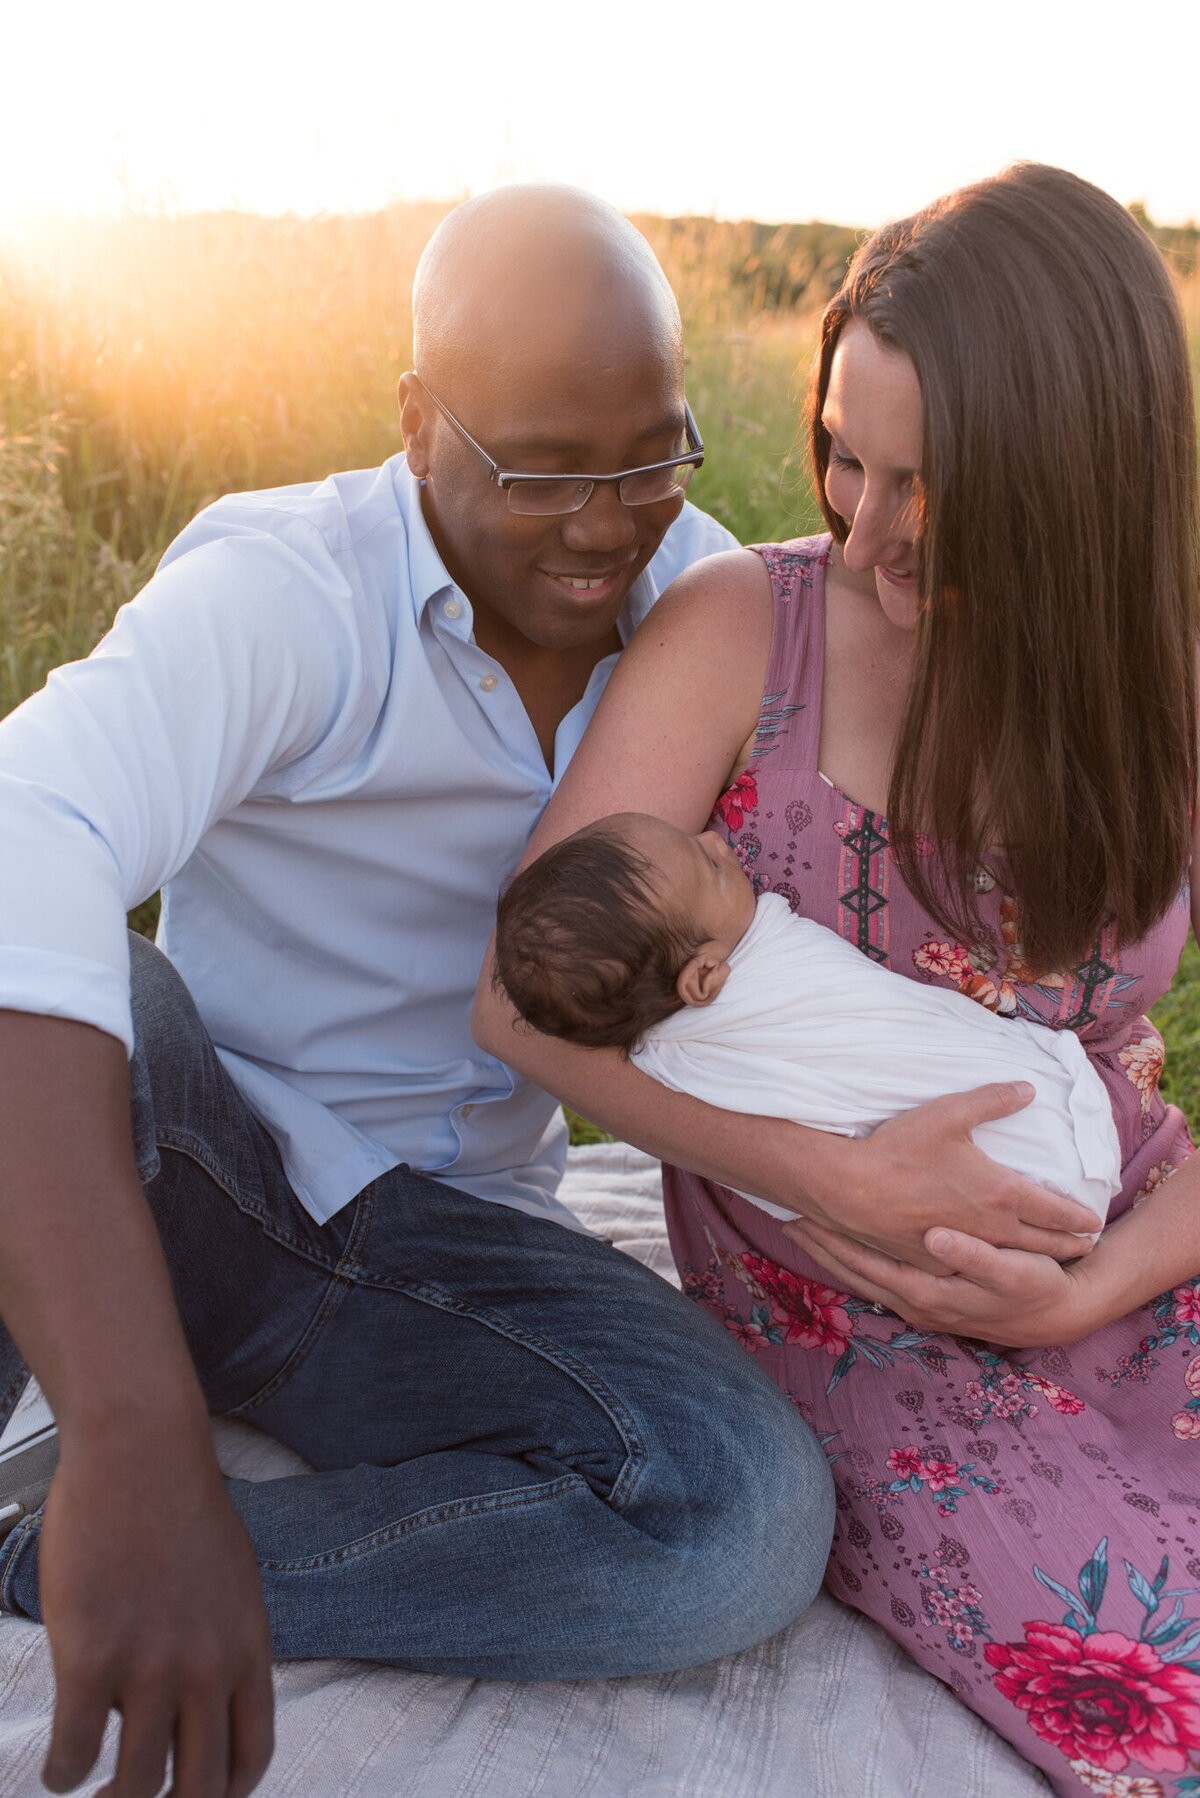 New parents are holding their newborn at an outdoor newborn session in a field with the sun setting behind them